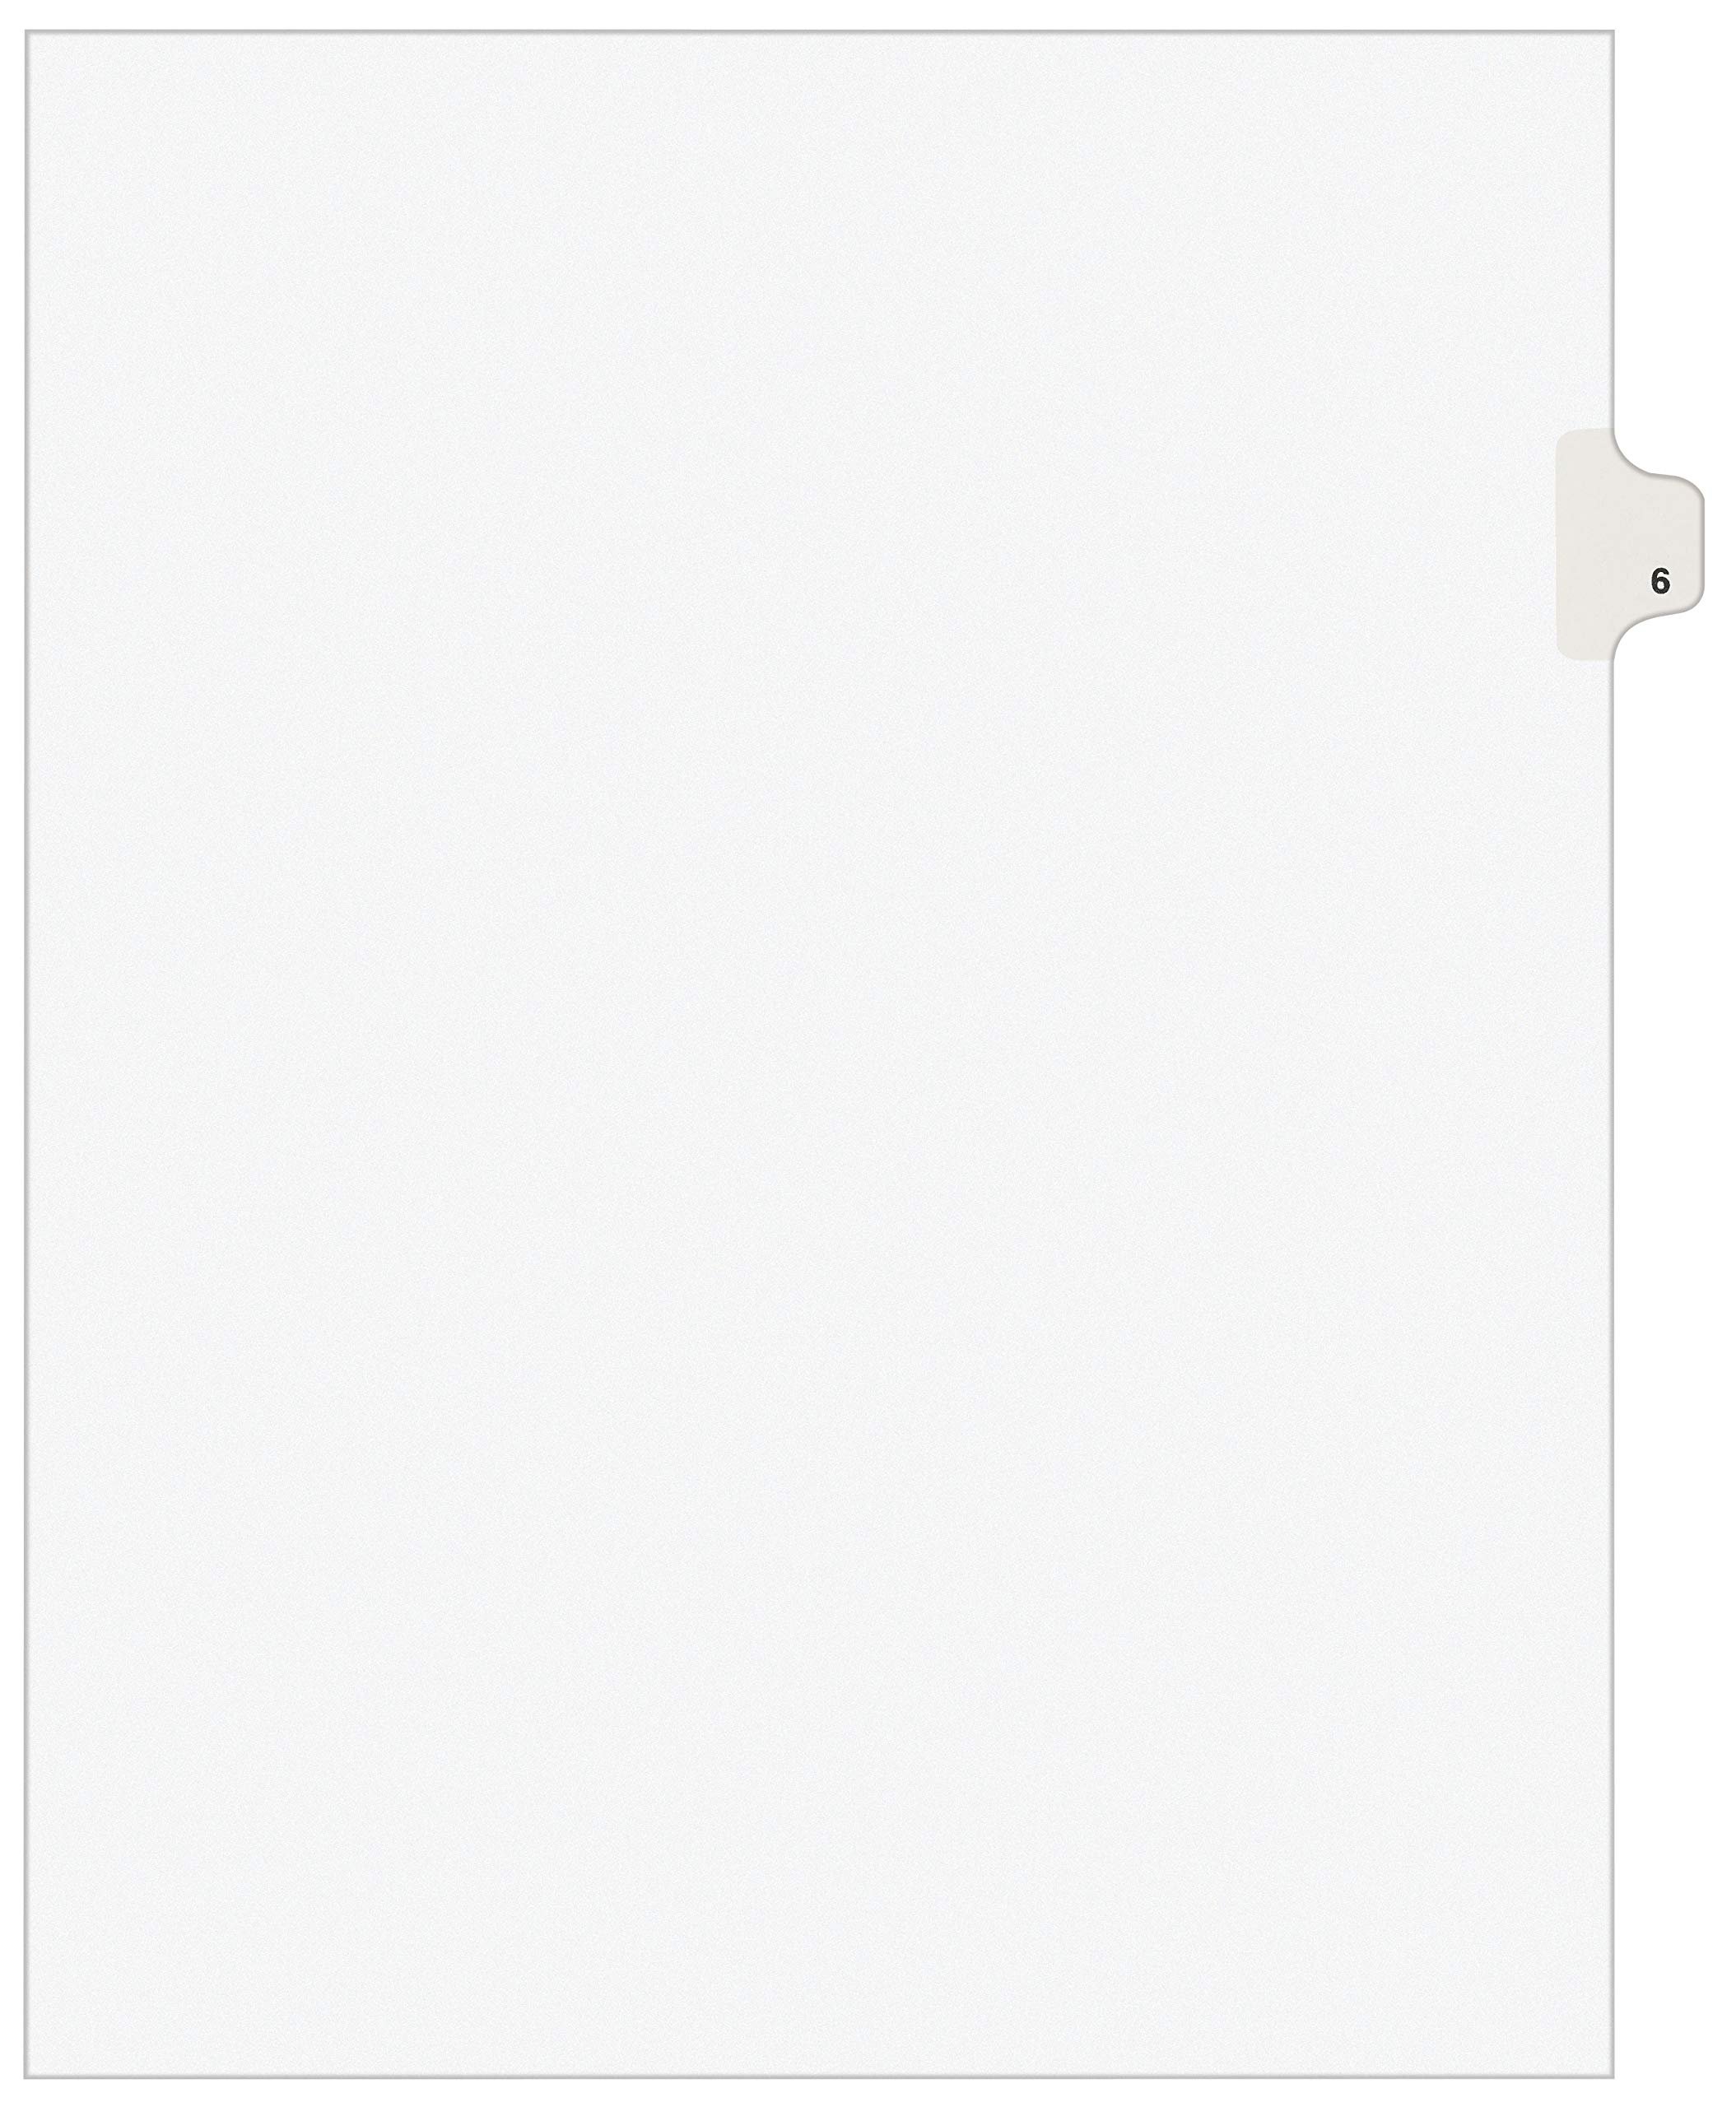 Book Cover Avery Individual Legal Exhibit Dividers, Avery Style, 6, Side Tab, 8.5 x 11 inches, Pack of 25 (11916),White